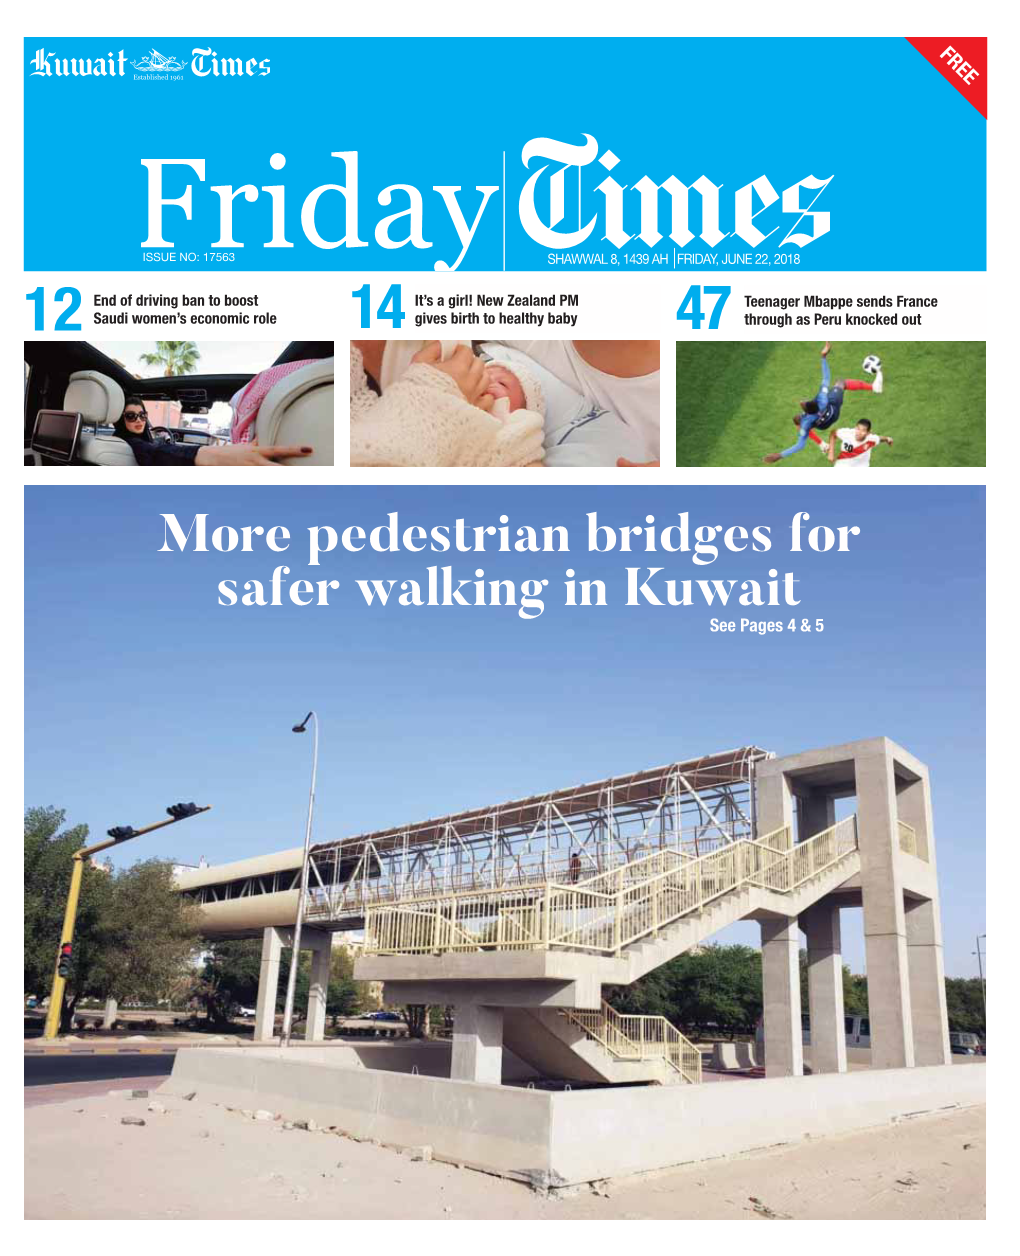 Pedestrian Bridges for Safer Walking in Kuwait See Pages 4 & 5 2 Friday Local Friday, June 22, 2018